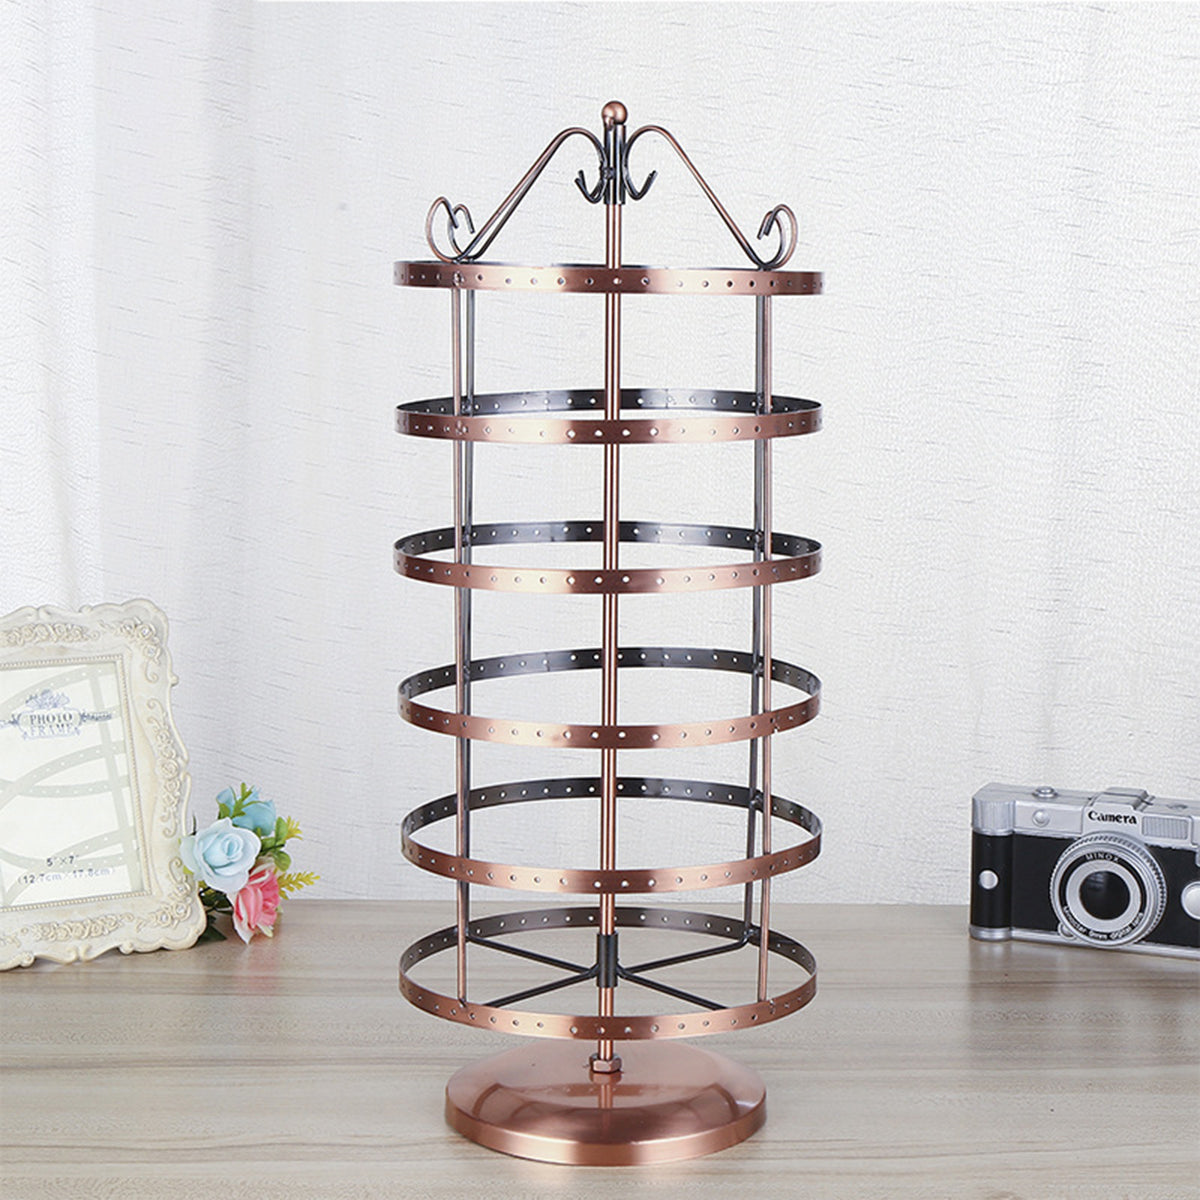 288 Holes 6-tiers Rotating Iron Jewelry Rack Earrings Rings Display Stand Holder Tools Kit